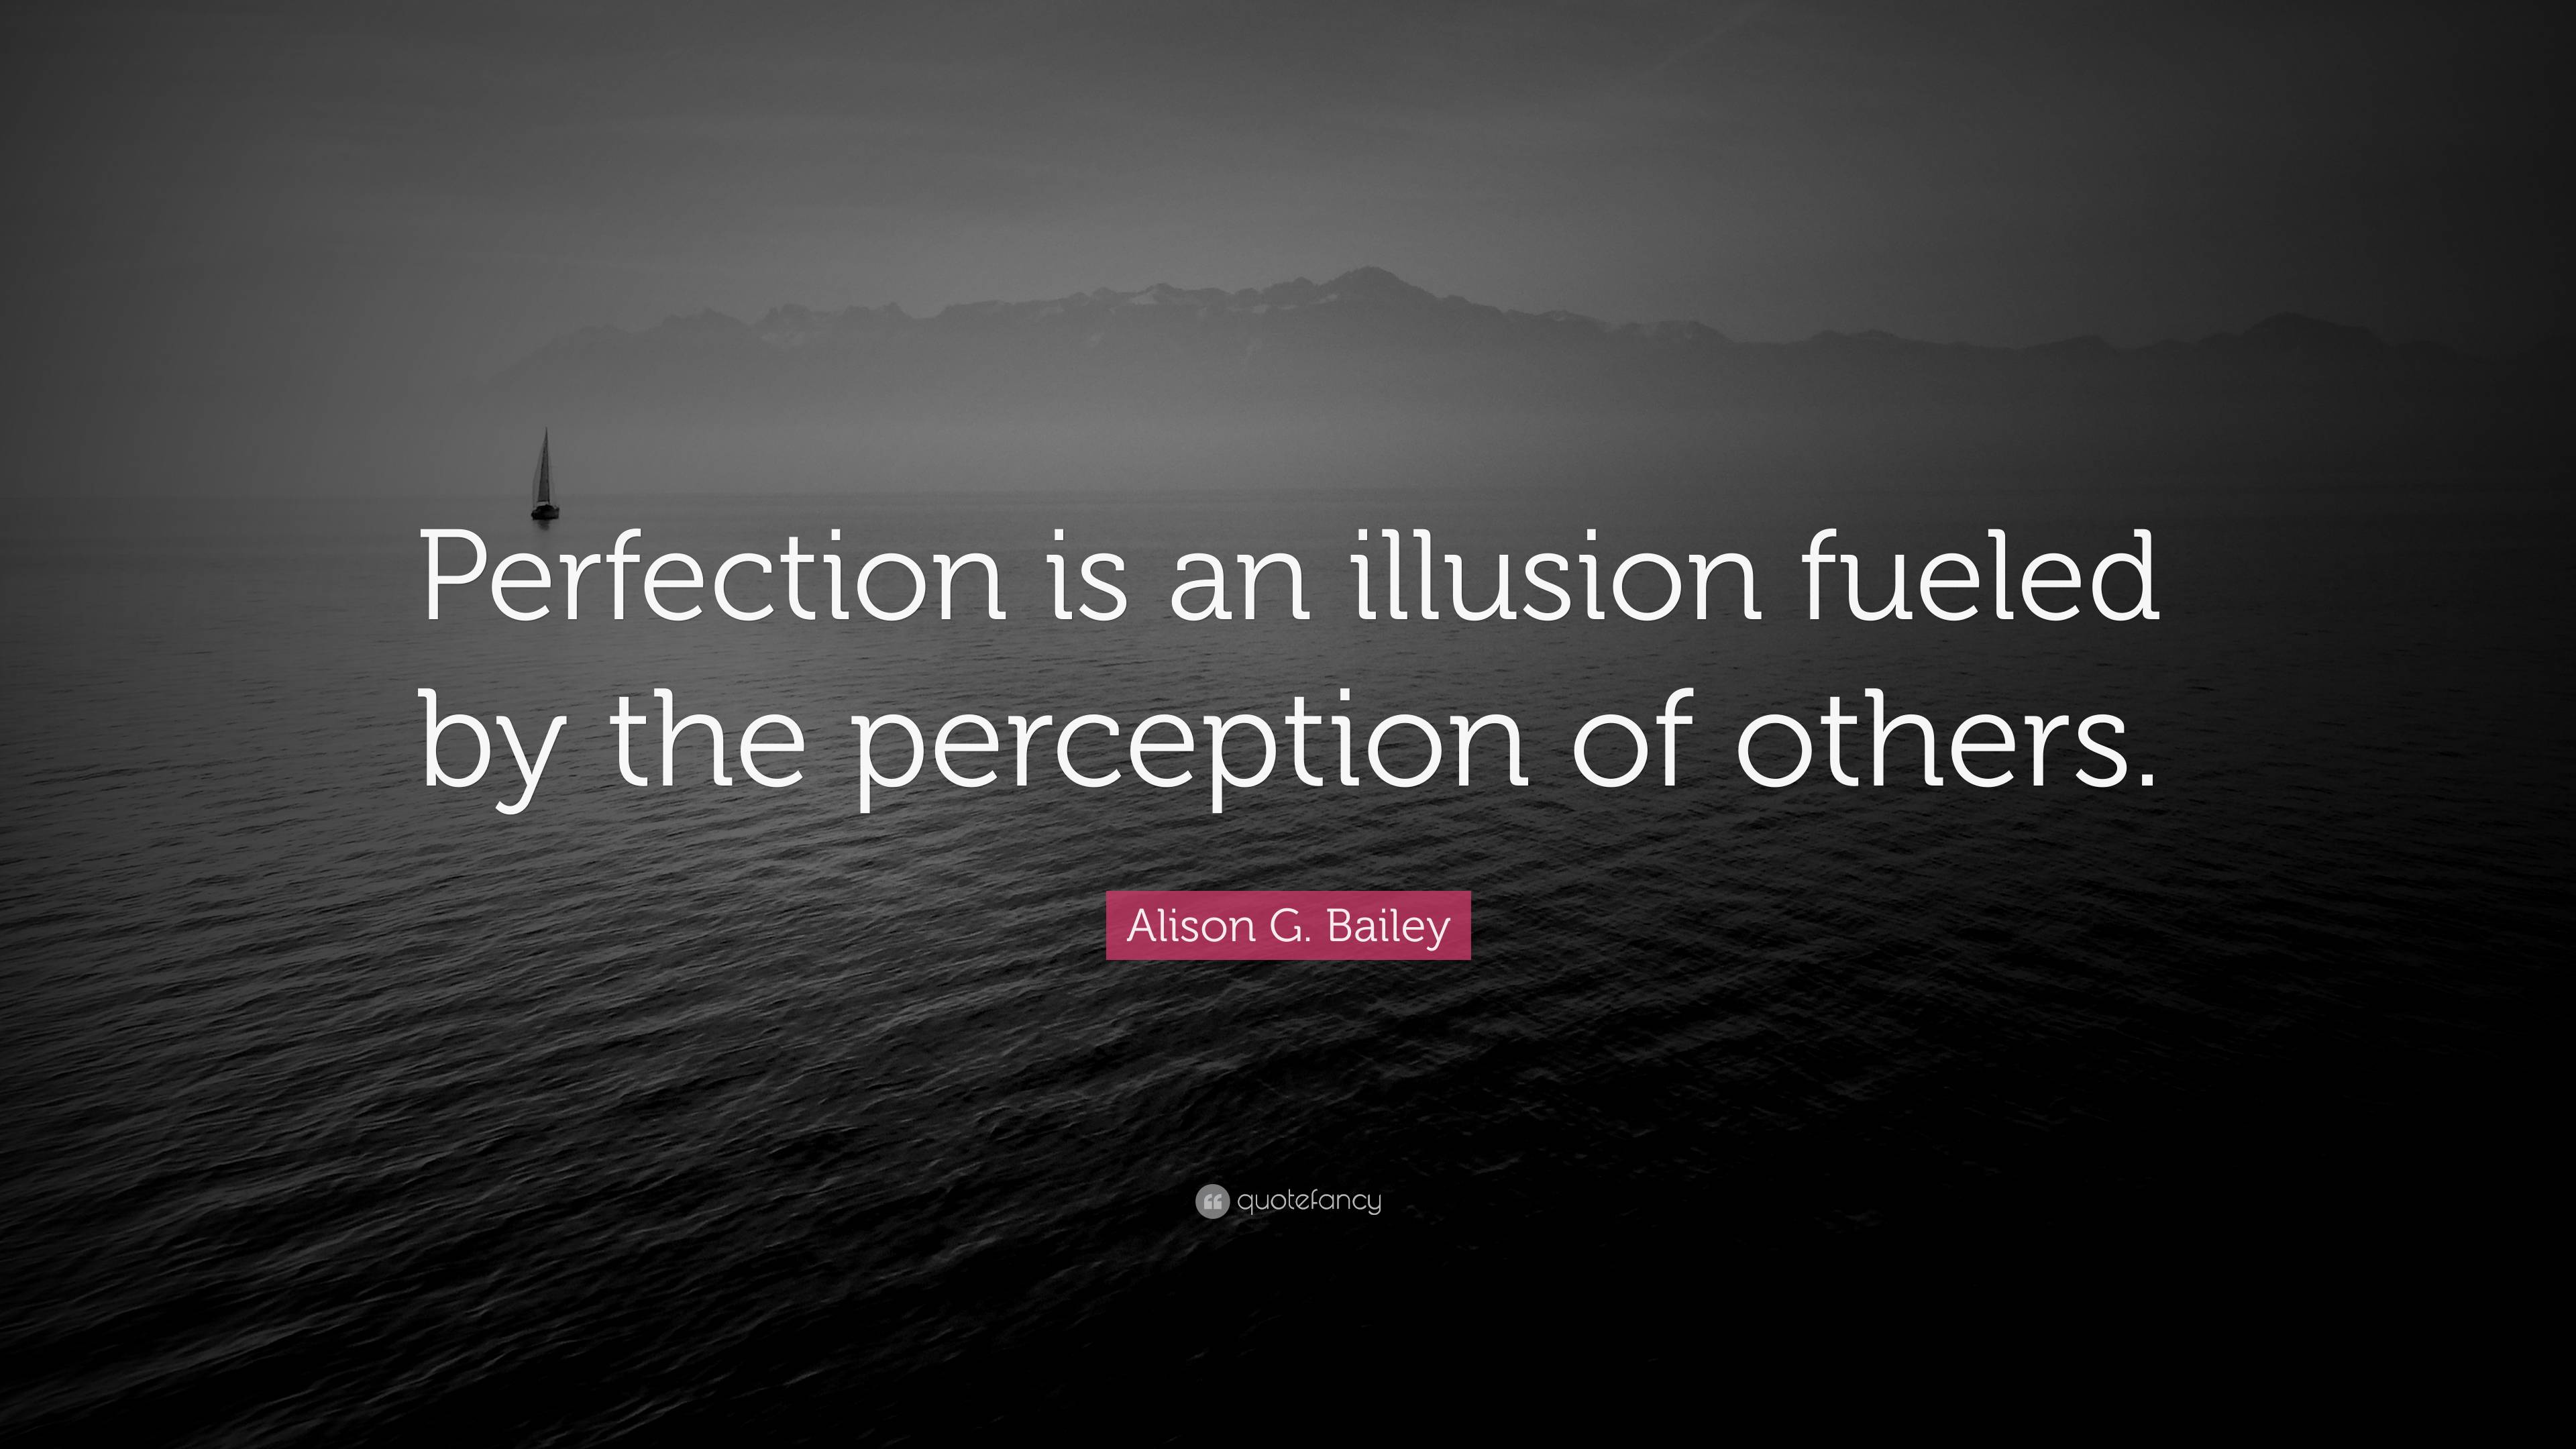 Alison G. Bailey Quote: “Perfection is an illusion fueled by the ...